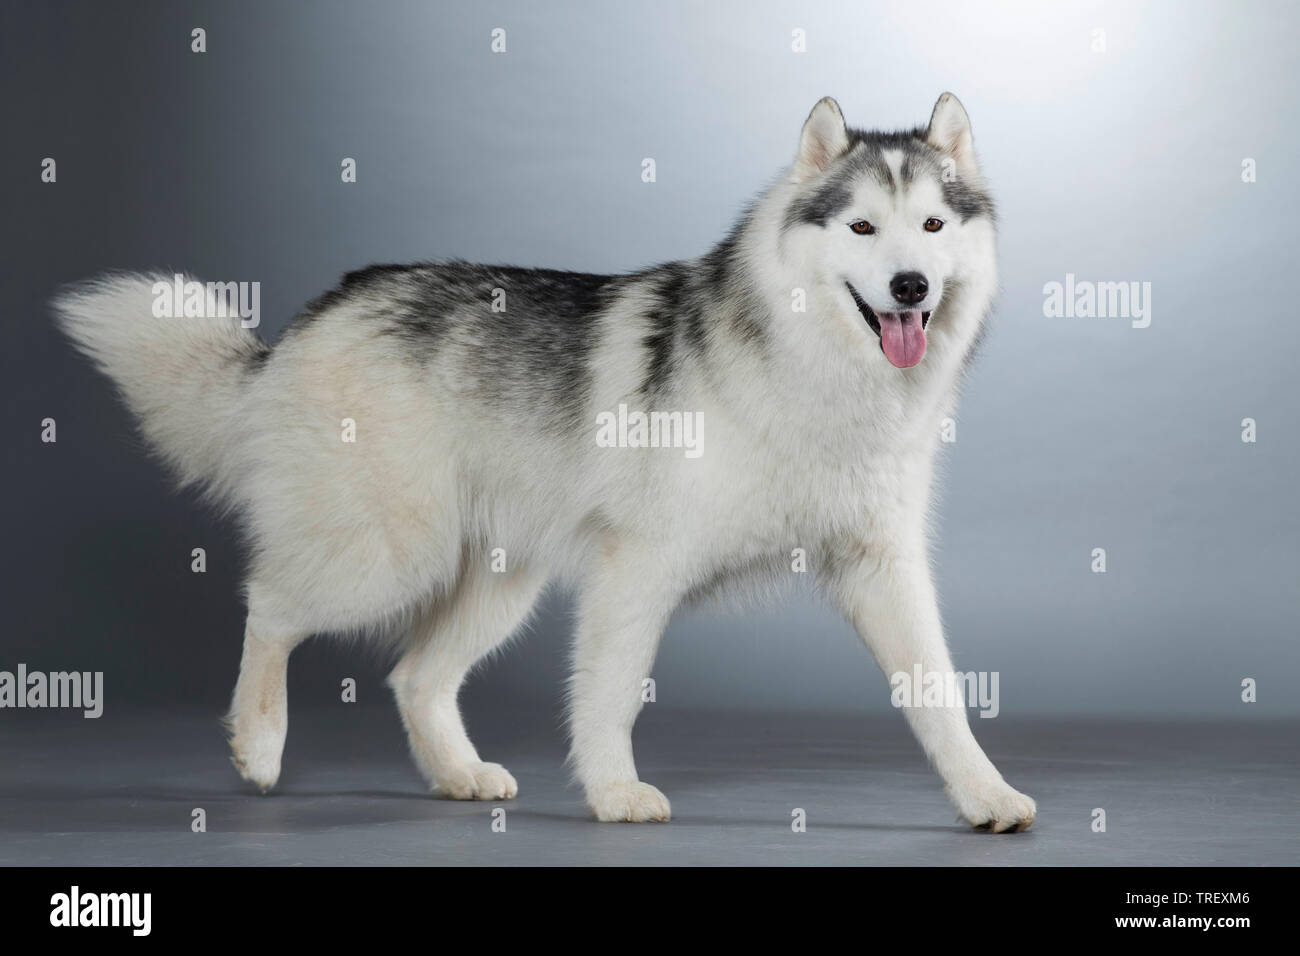 Siberian Husky. Adult dog walking. Studio picture against a gray background. Germany Stock Photo